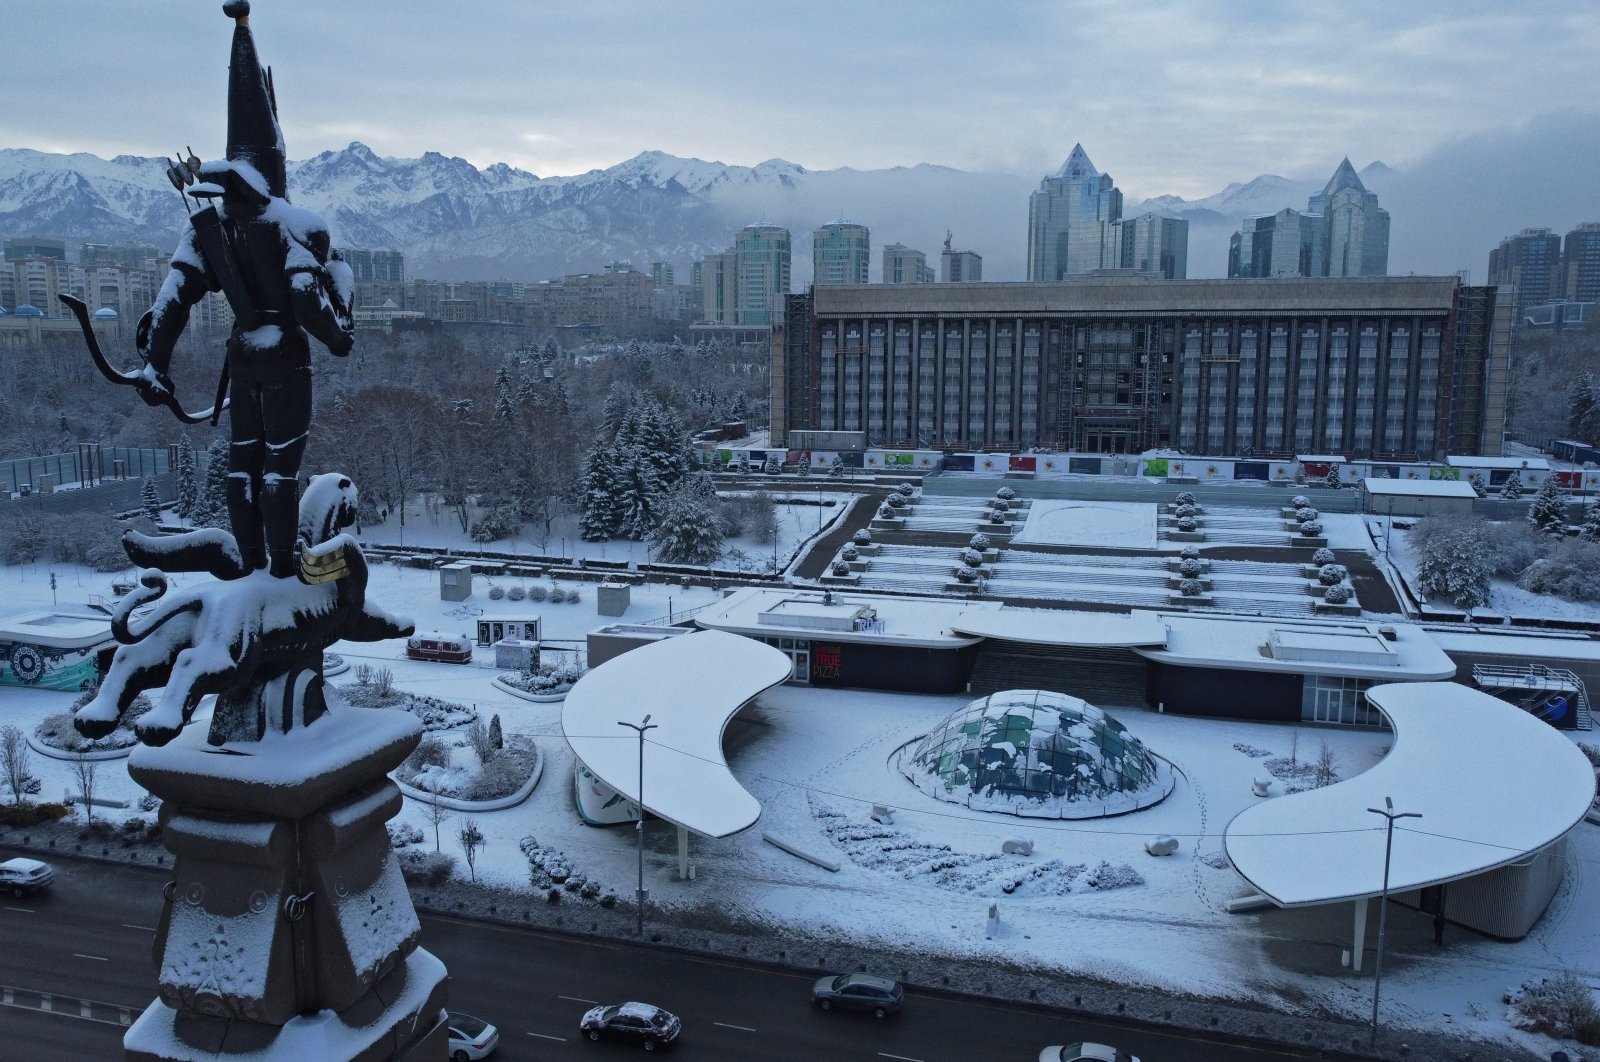 A view shows the Monument of Independence in front of the city administration headquarters in Almaty, Kazakhstan, Nov. 17, 2022. (Reuters Photo)